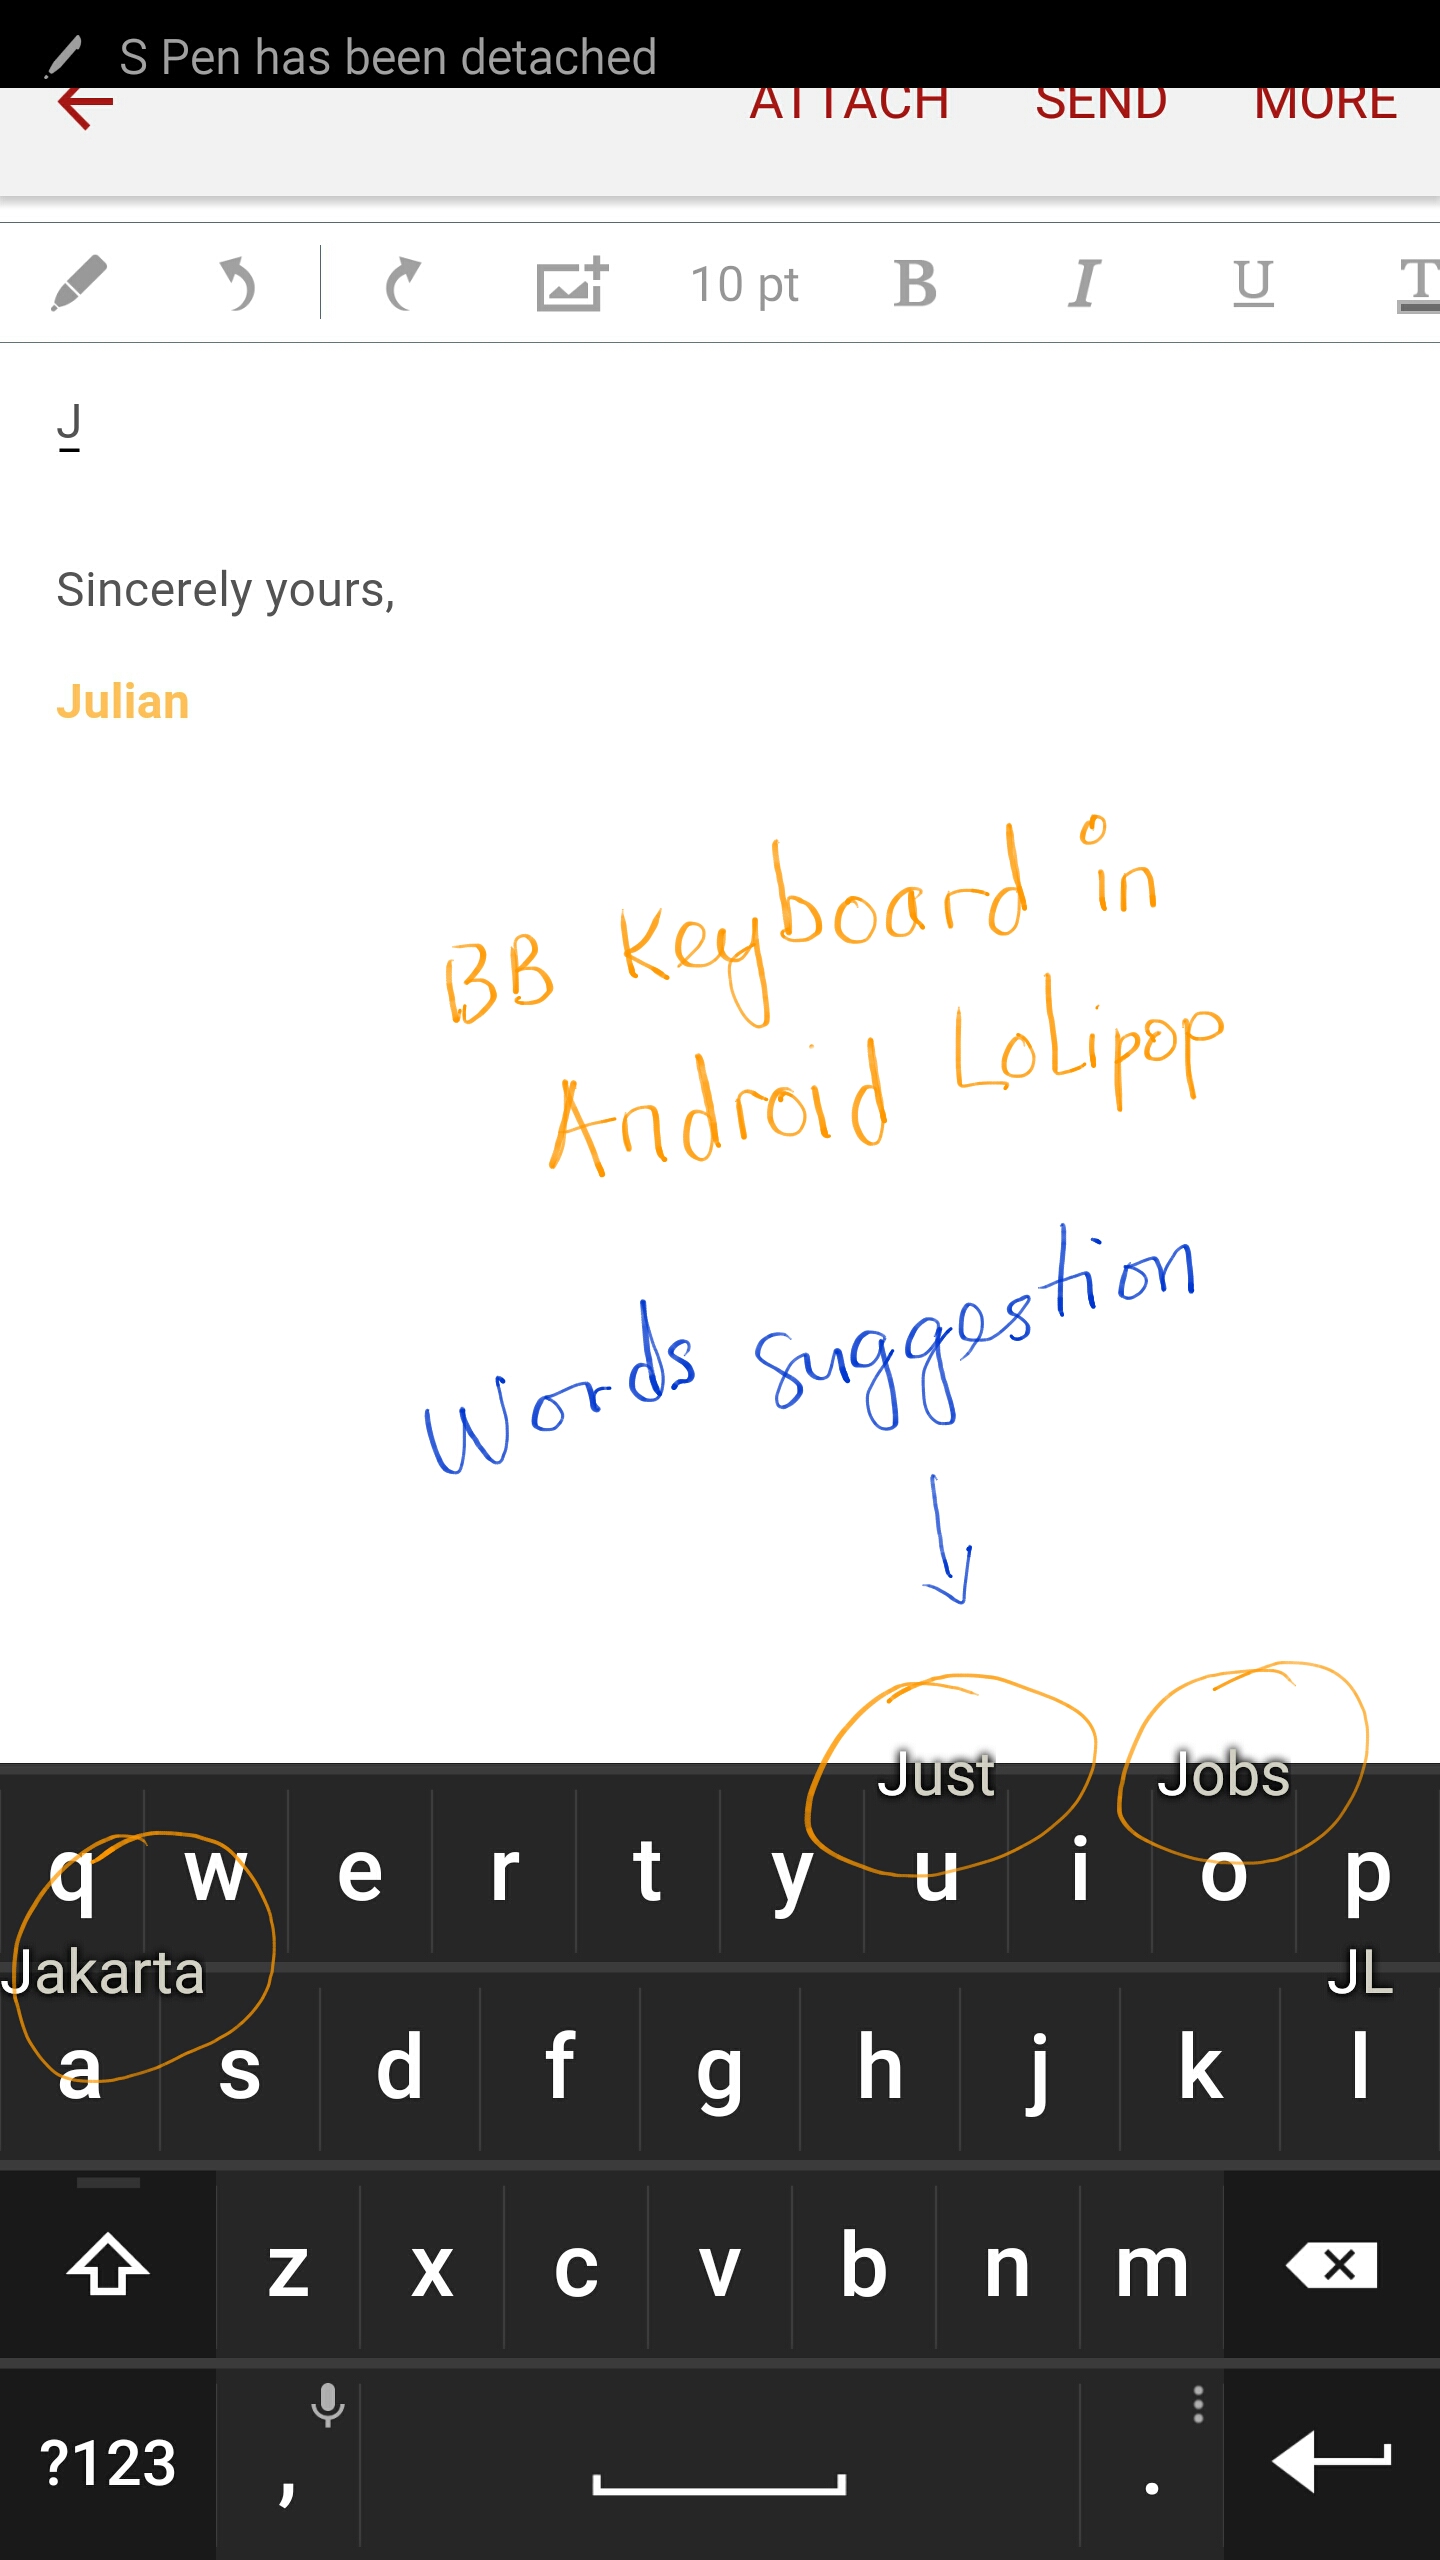 Predictive text in BB Keyboard Android